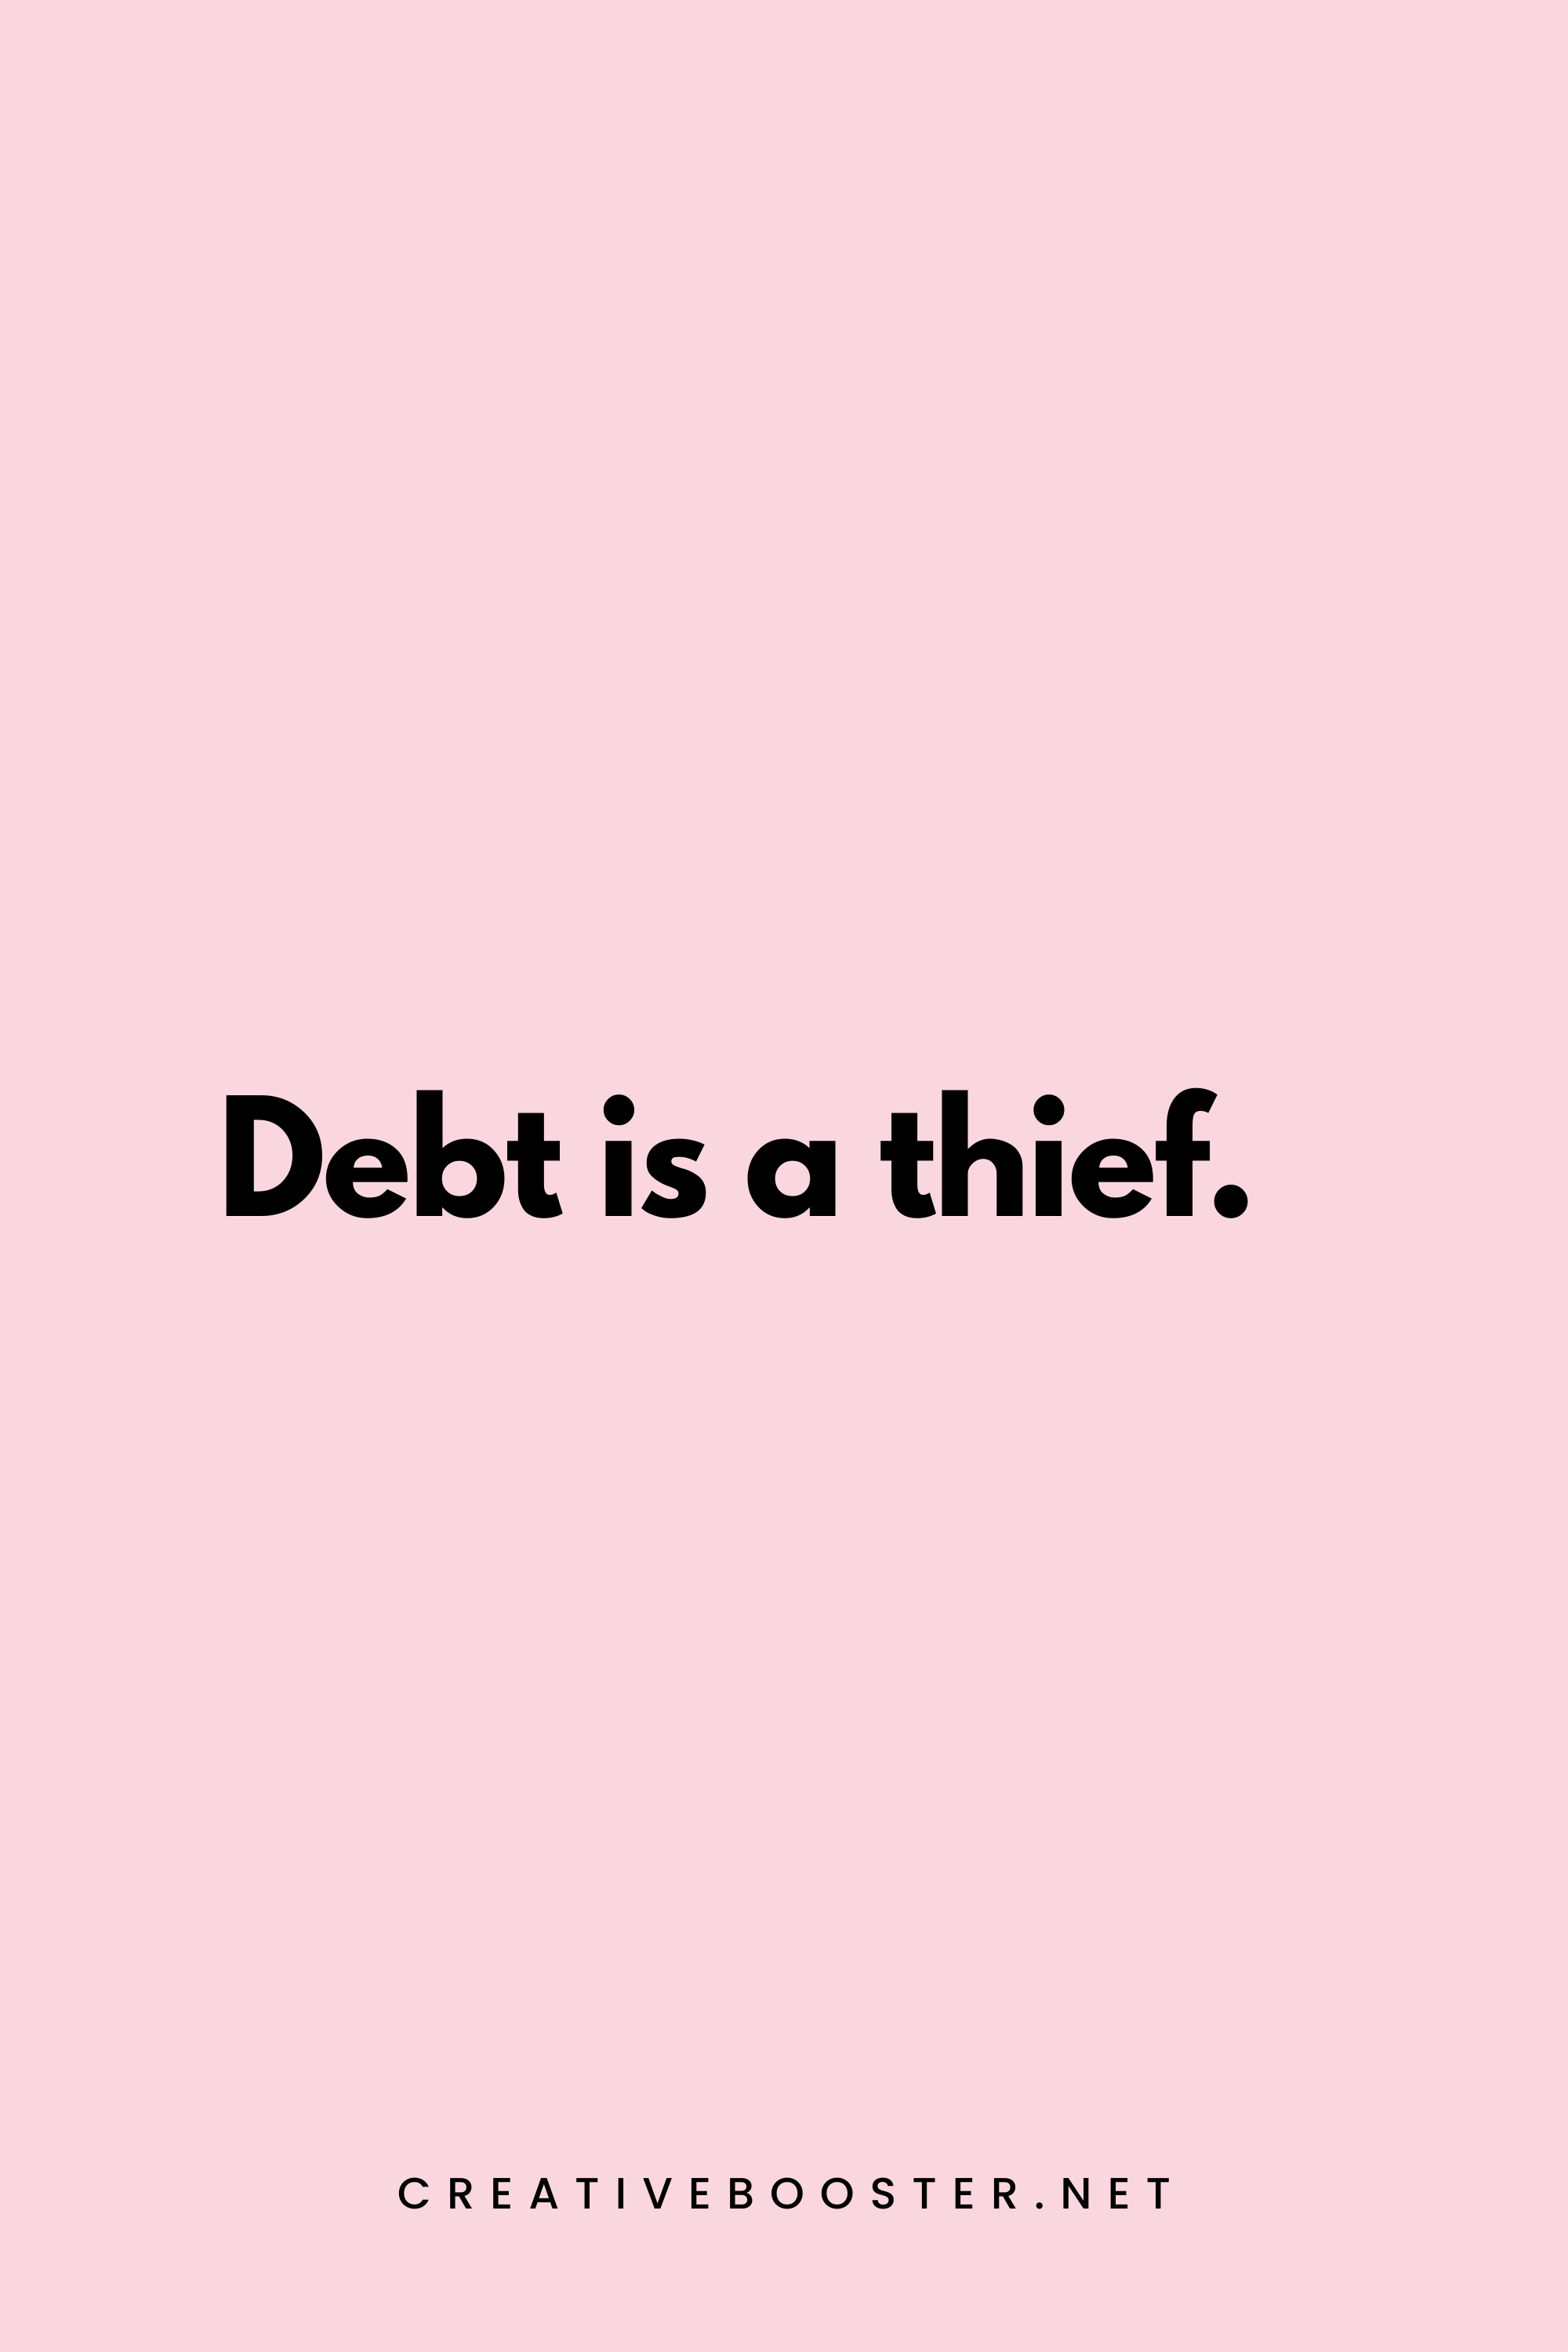 22. Debt is a thief. - Unknown - 2. Short Financial Freedom Quotes